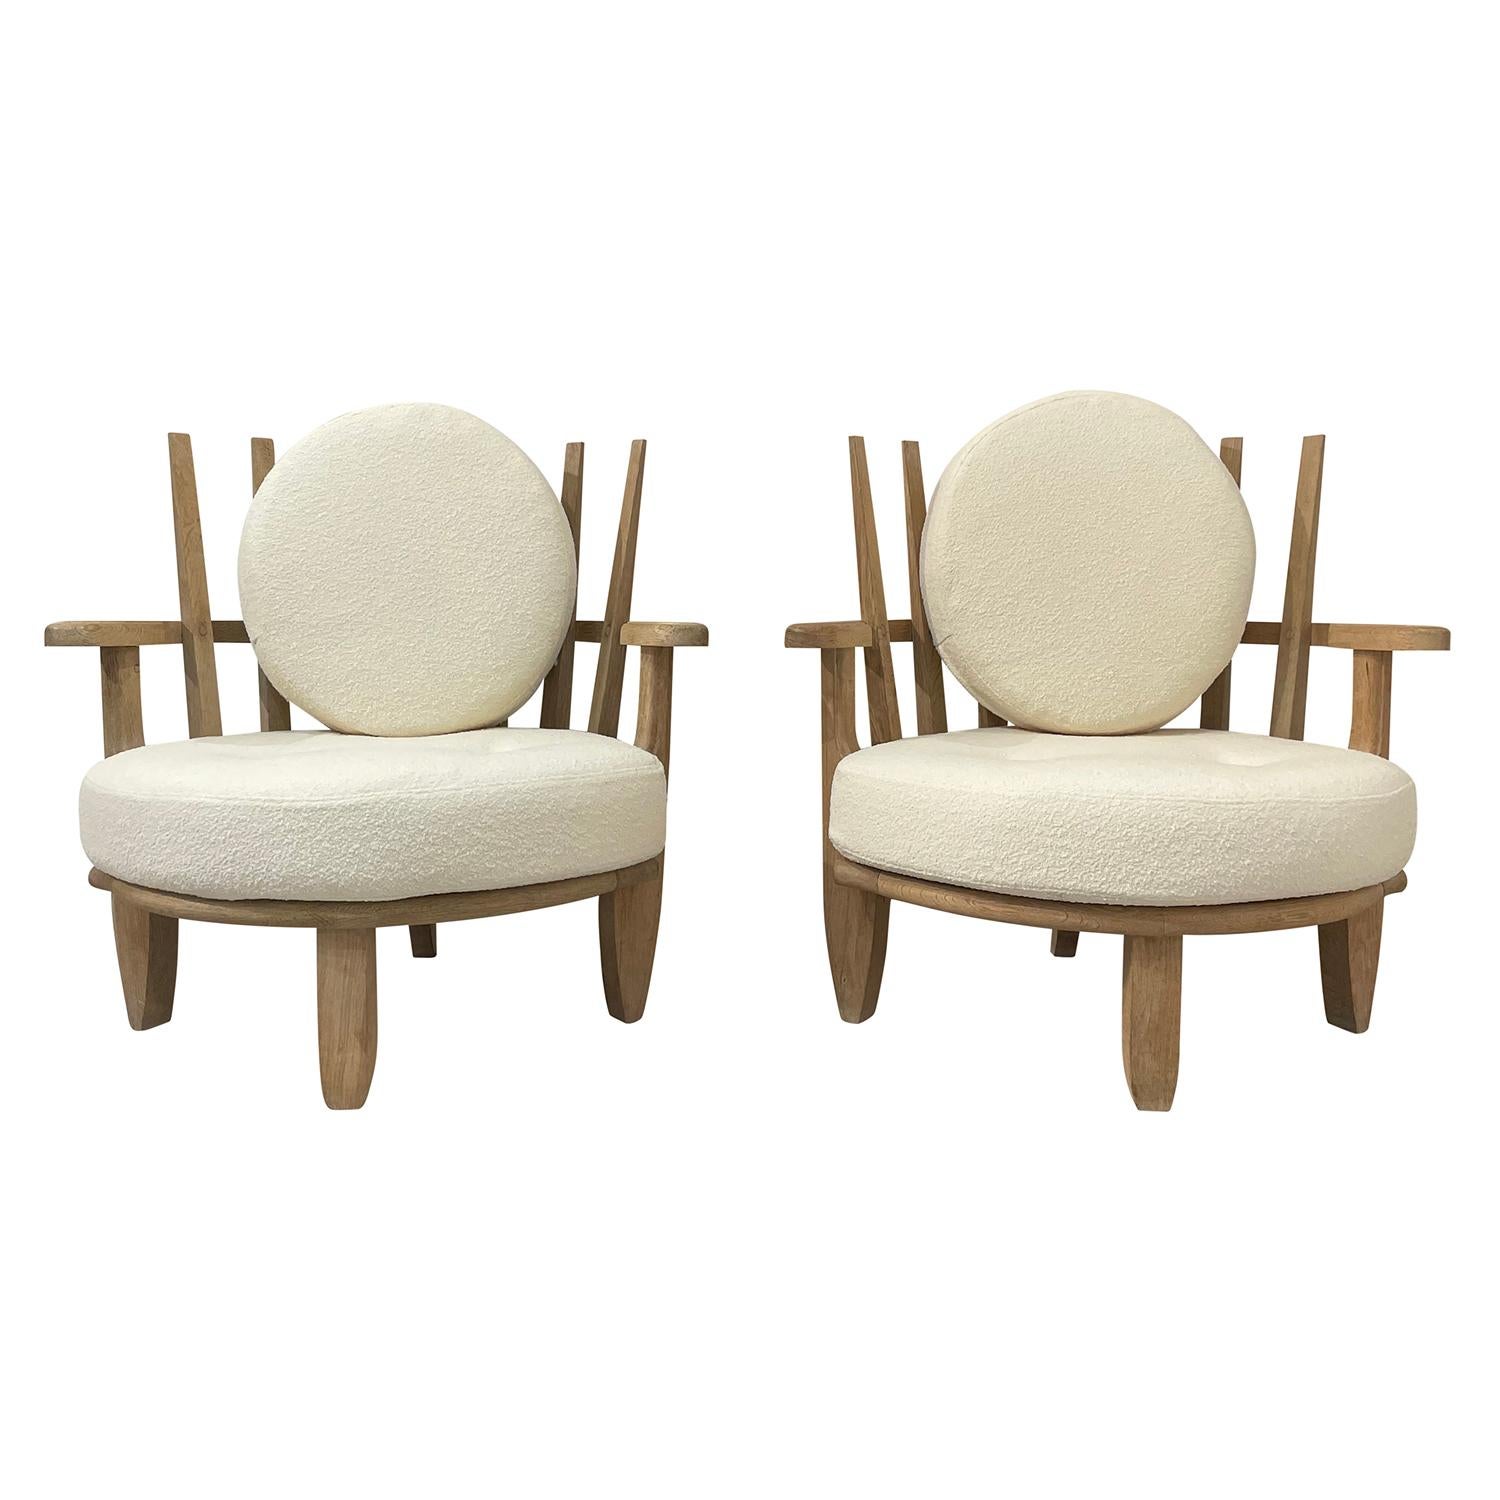 A light-brown, vintage Mid-Century Modern pair of lounge chairs made of hand carved bleached Oakwood, designed by Guillerme et Chambron in good condition. The particularized center chairs are composed with an oval back cushion, pillow. The seat